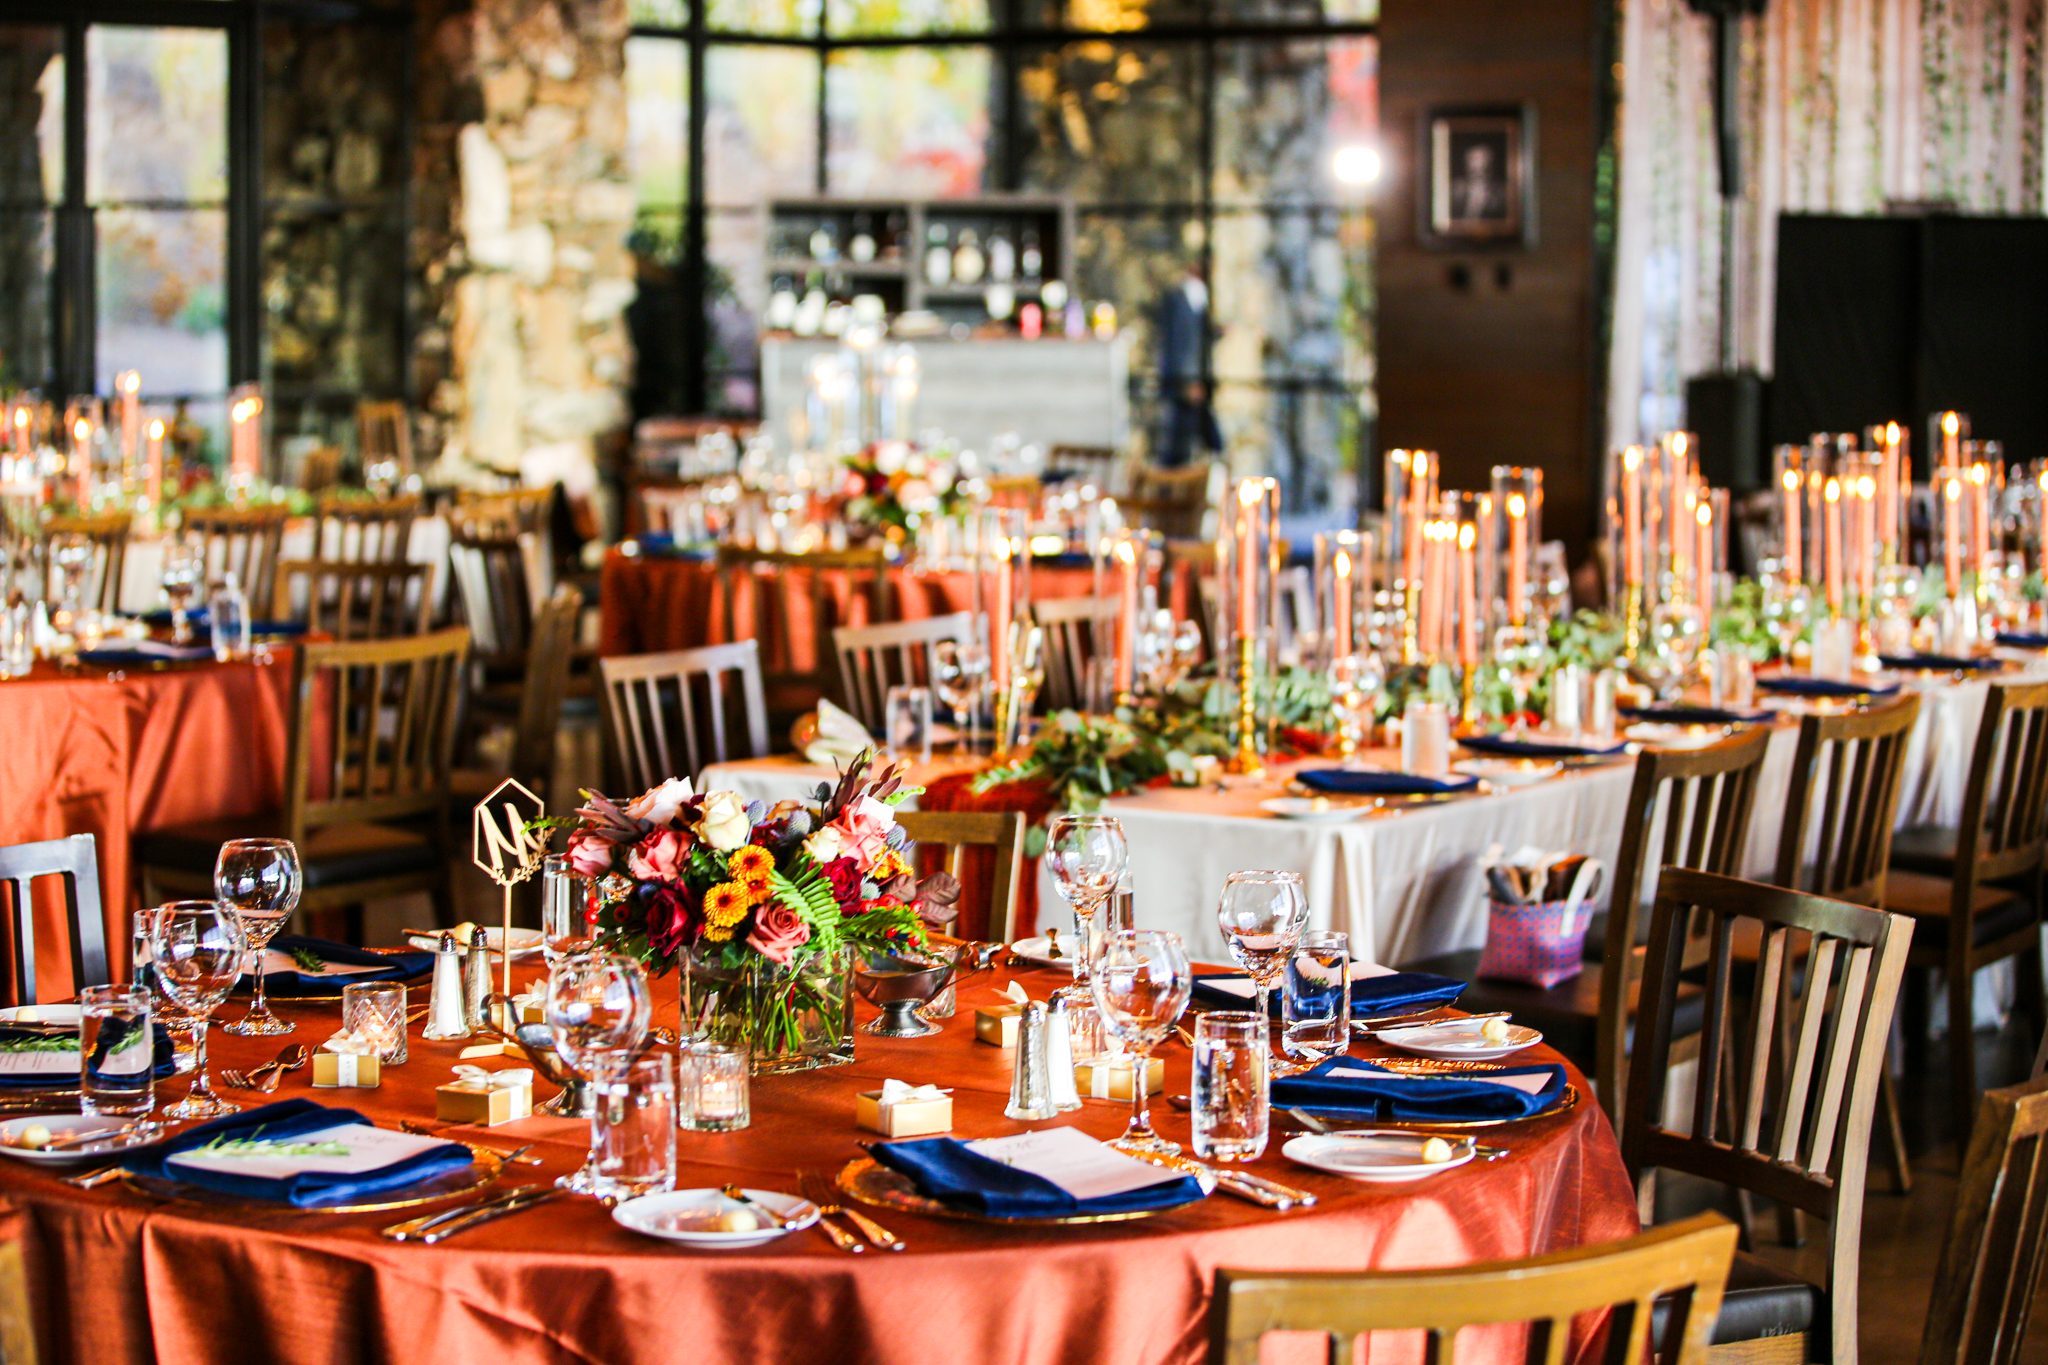 Light Shifter Studios based in Asheville captures weddings, music, and events throughout the south.